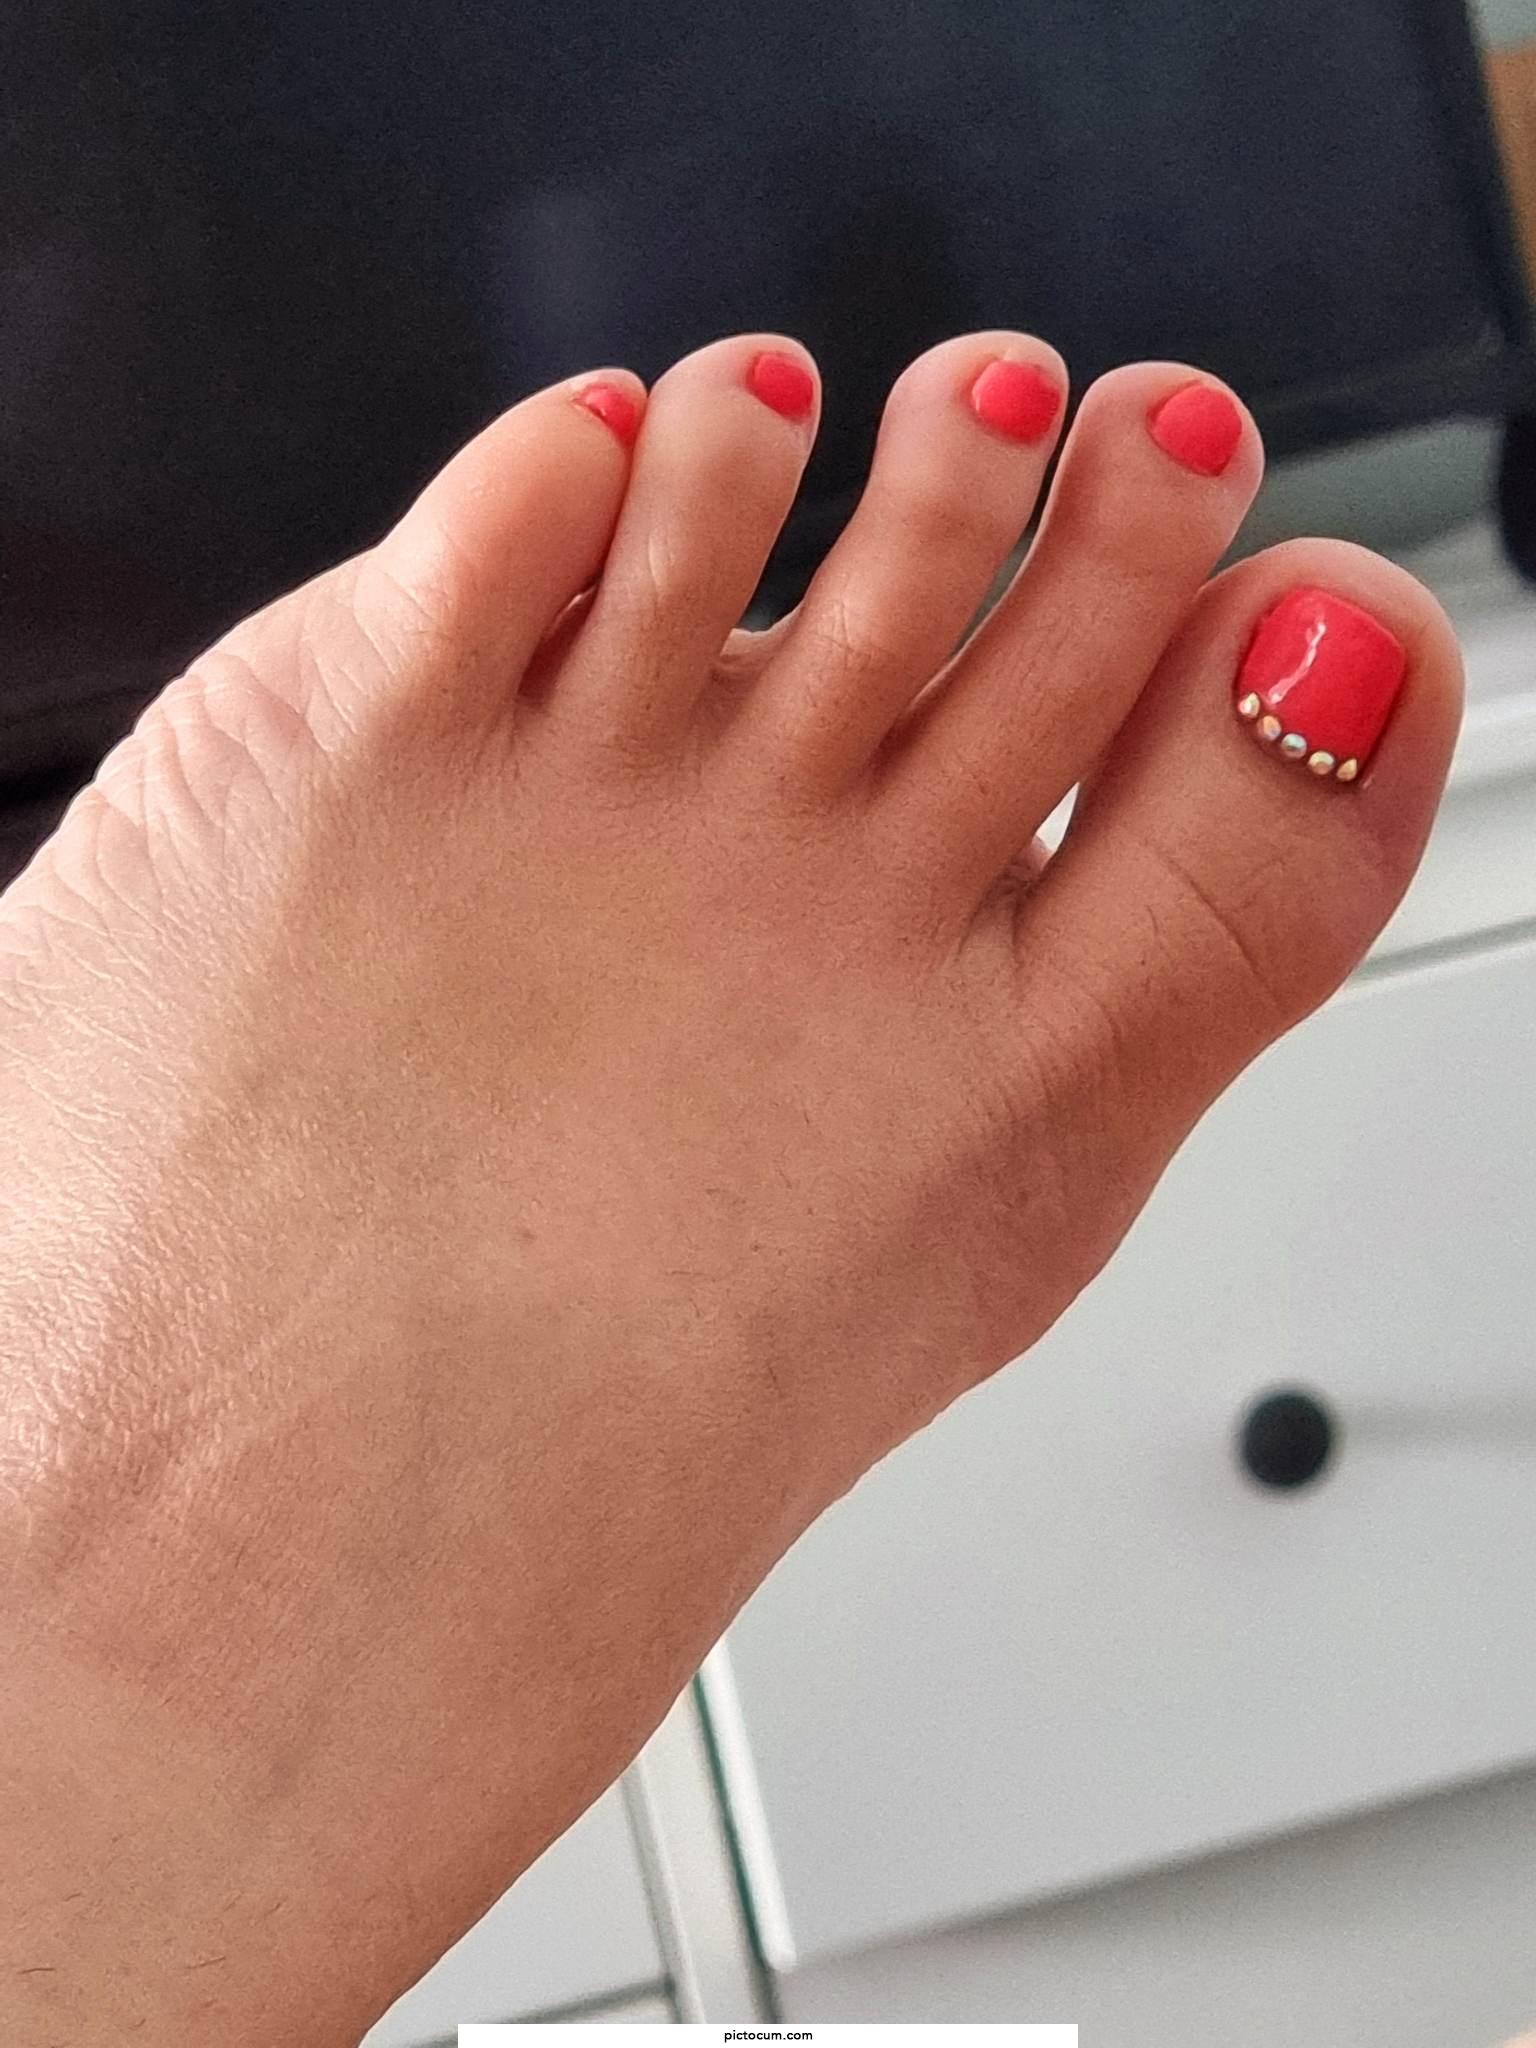 For married feet lovers